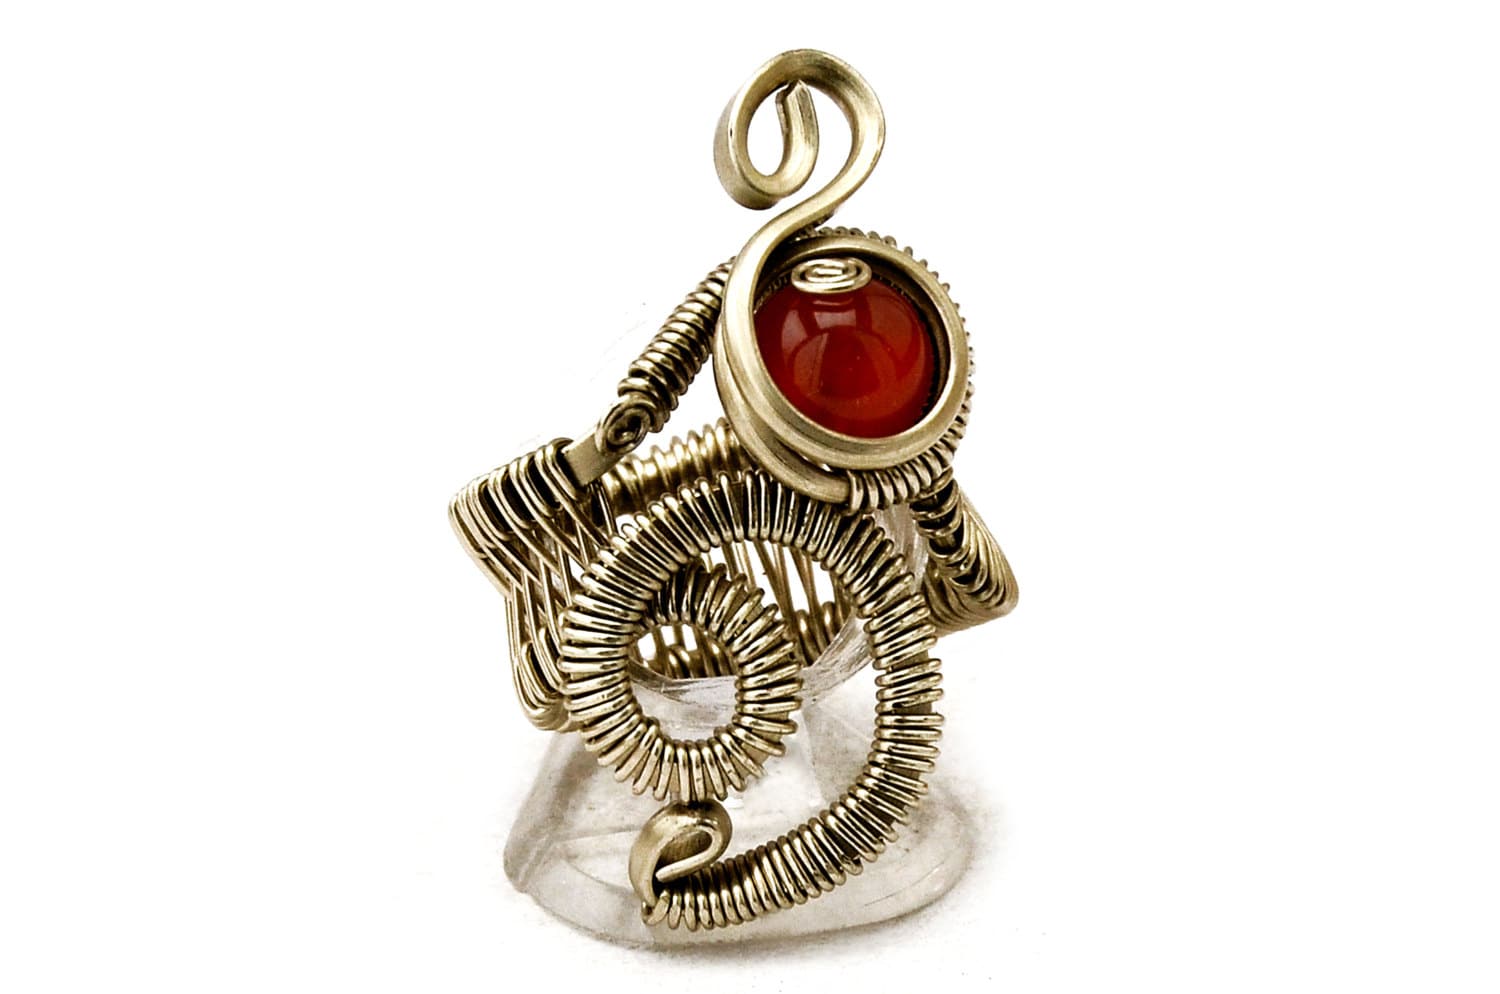 Red Carnelian Ring Open Band Ring Wire Wrap Ring Cocktail Ring Red Stone Ring Steampunk Ring Metalwork Bohemian Jewelry Anniversary Gift